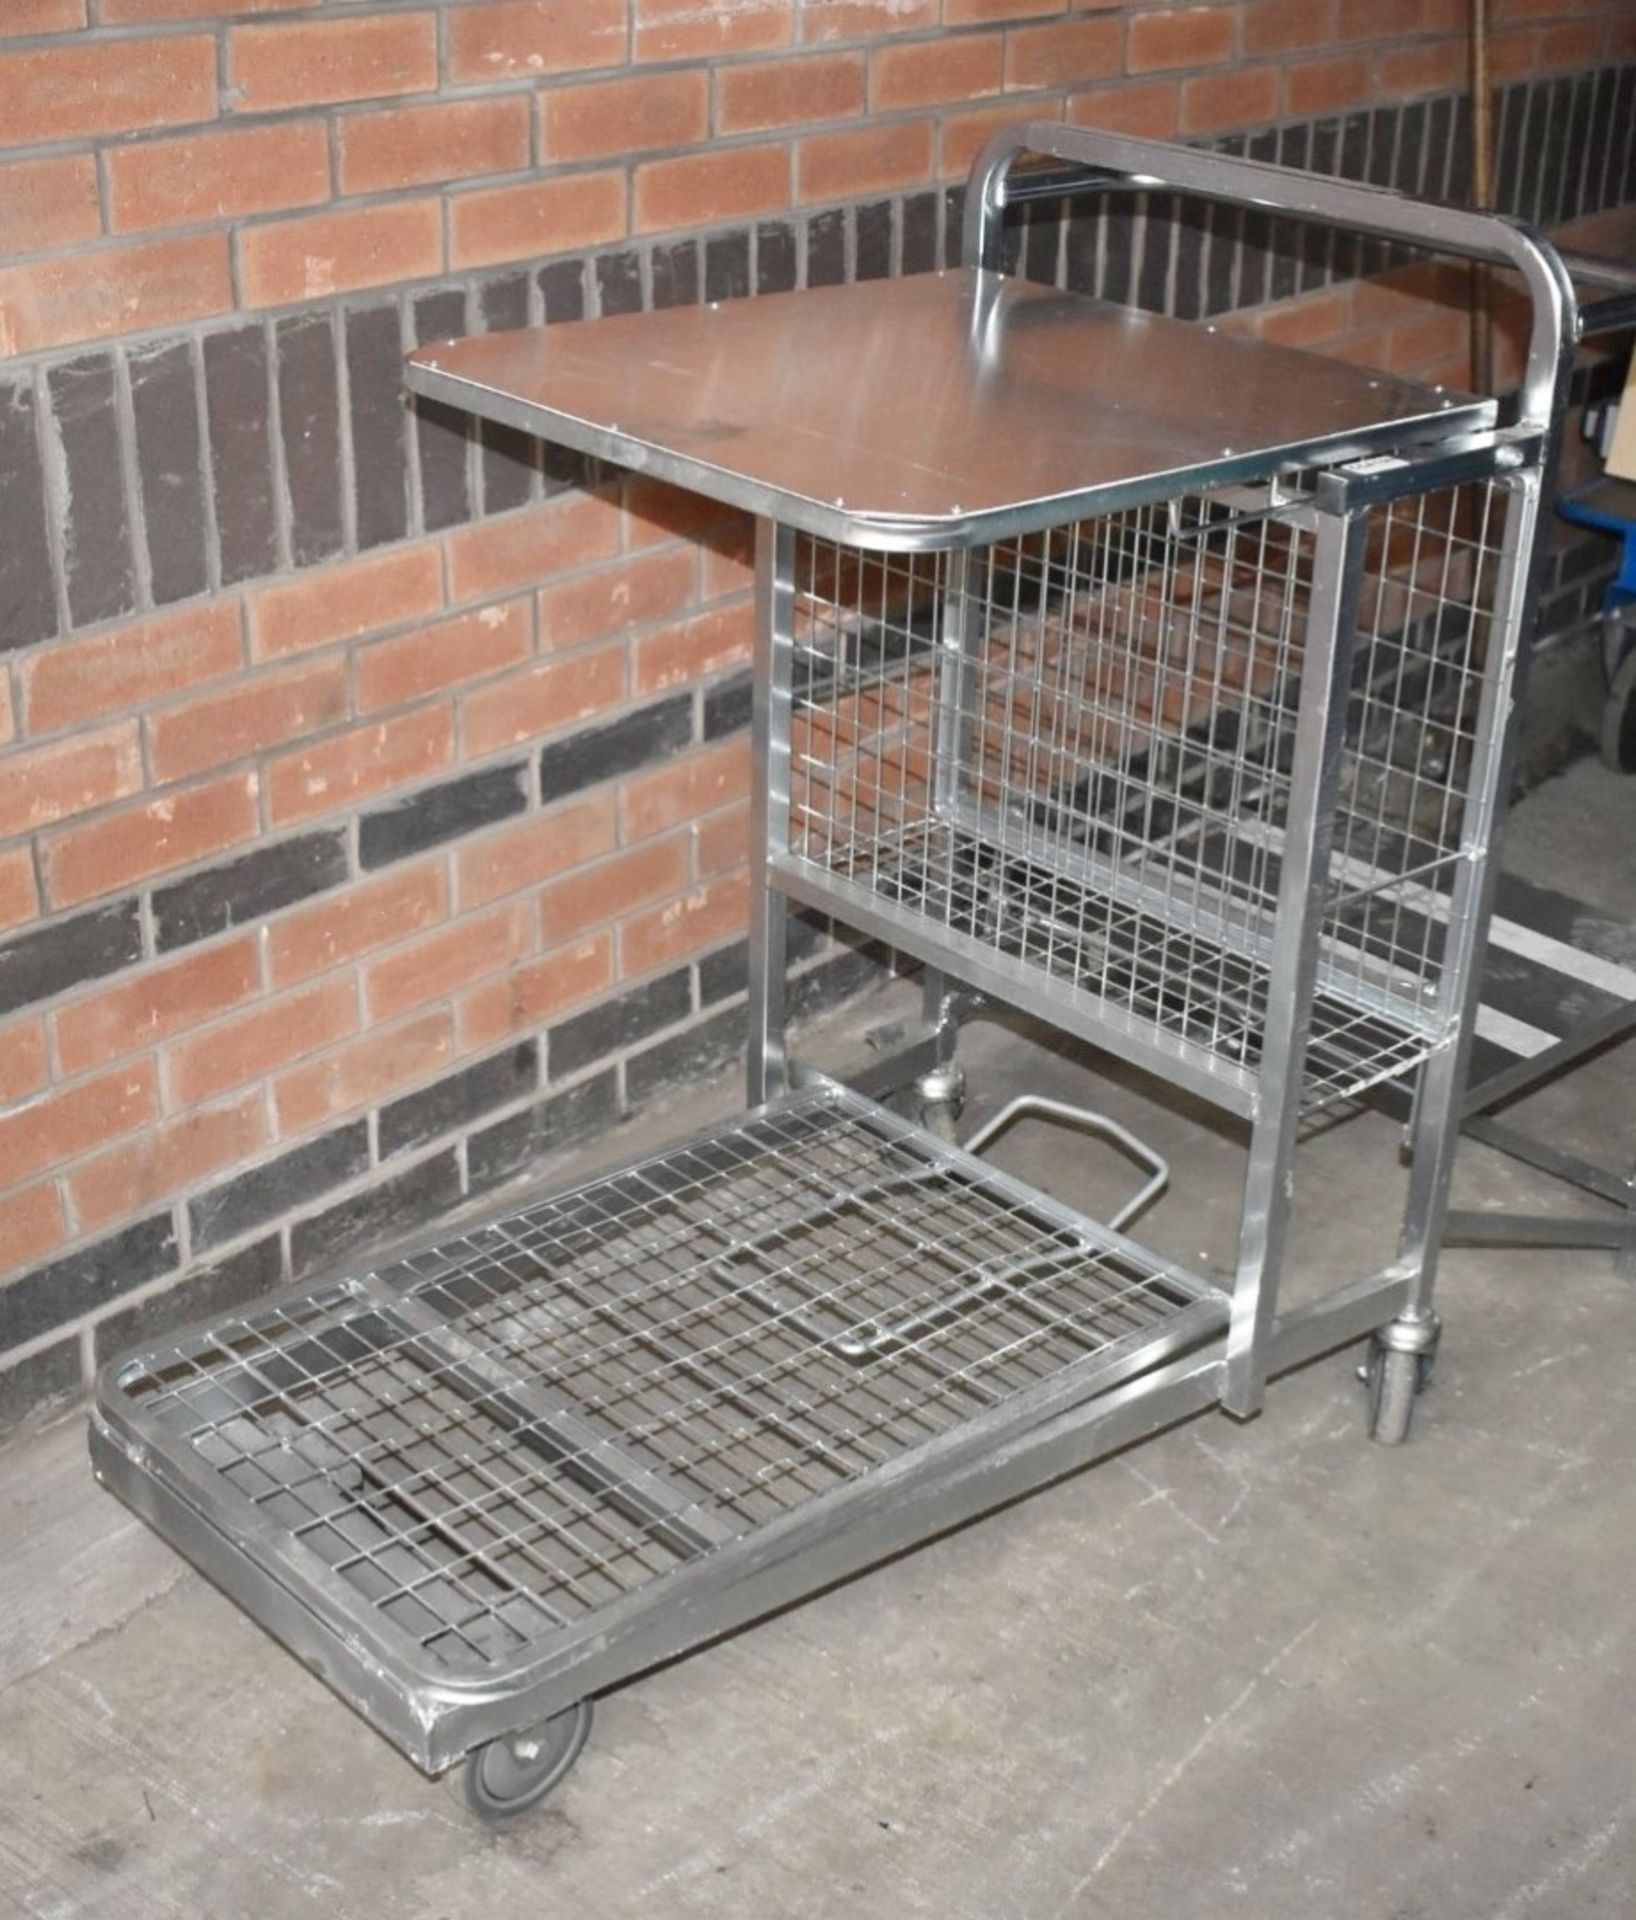 1 x Supermarket Retail Merchandising Trolley With Pull Out Step and Folding Shelf - CL595 - Ref: CCA - Image 5 of 12